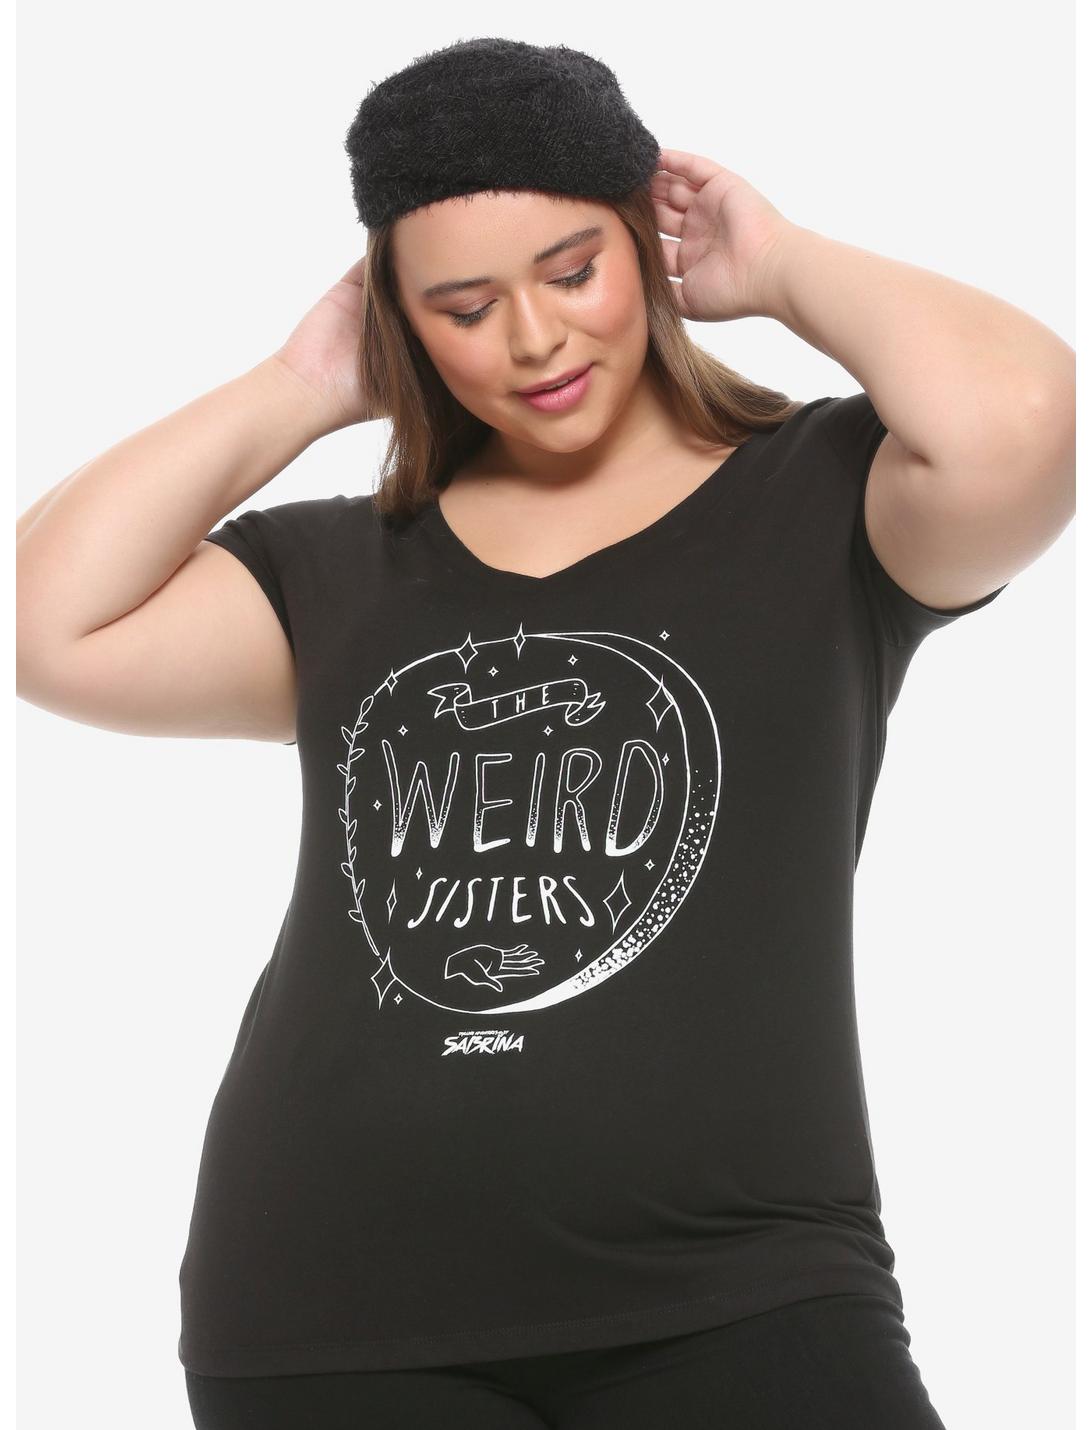 Chilling Adventures Of Sabrina The Weird Sisters Girls T-Shirt Plus Size, MULTI, hi-res